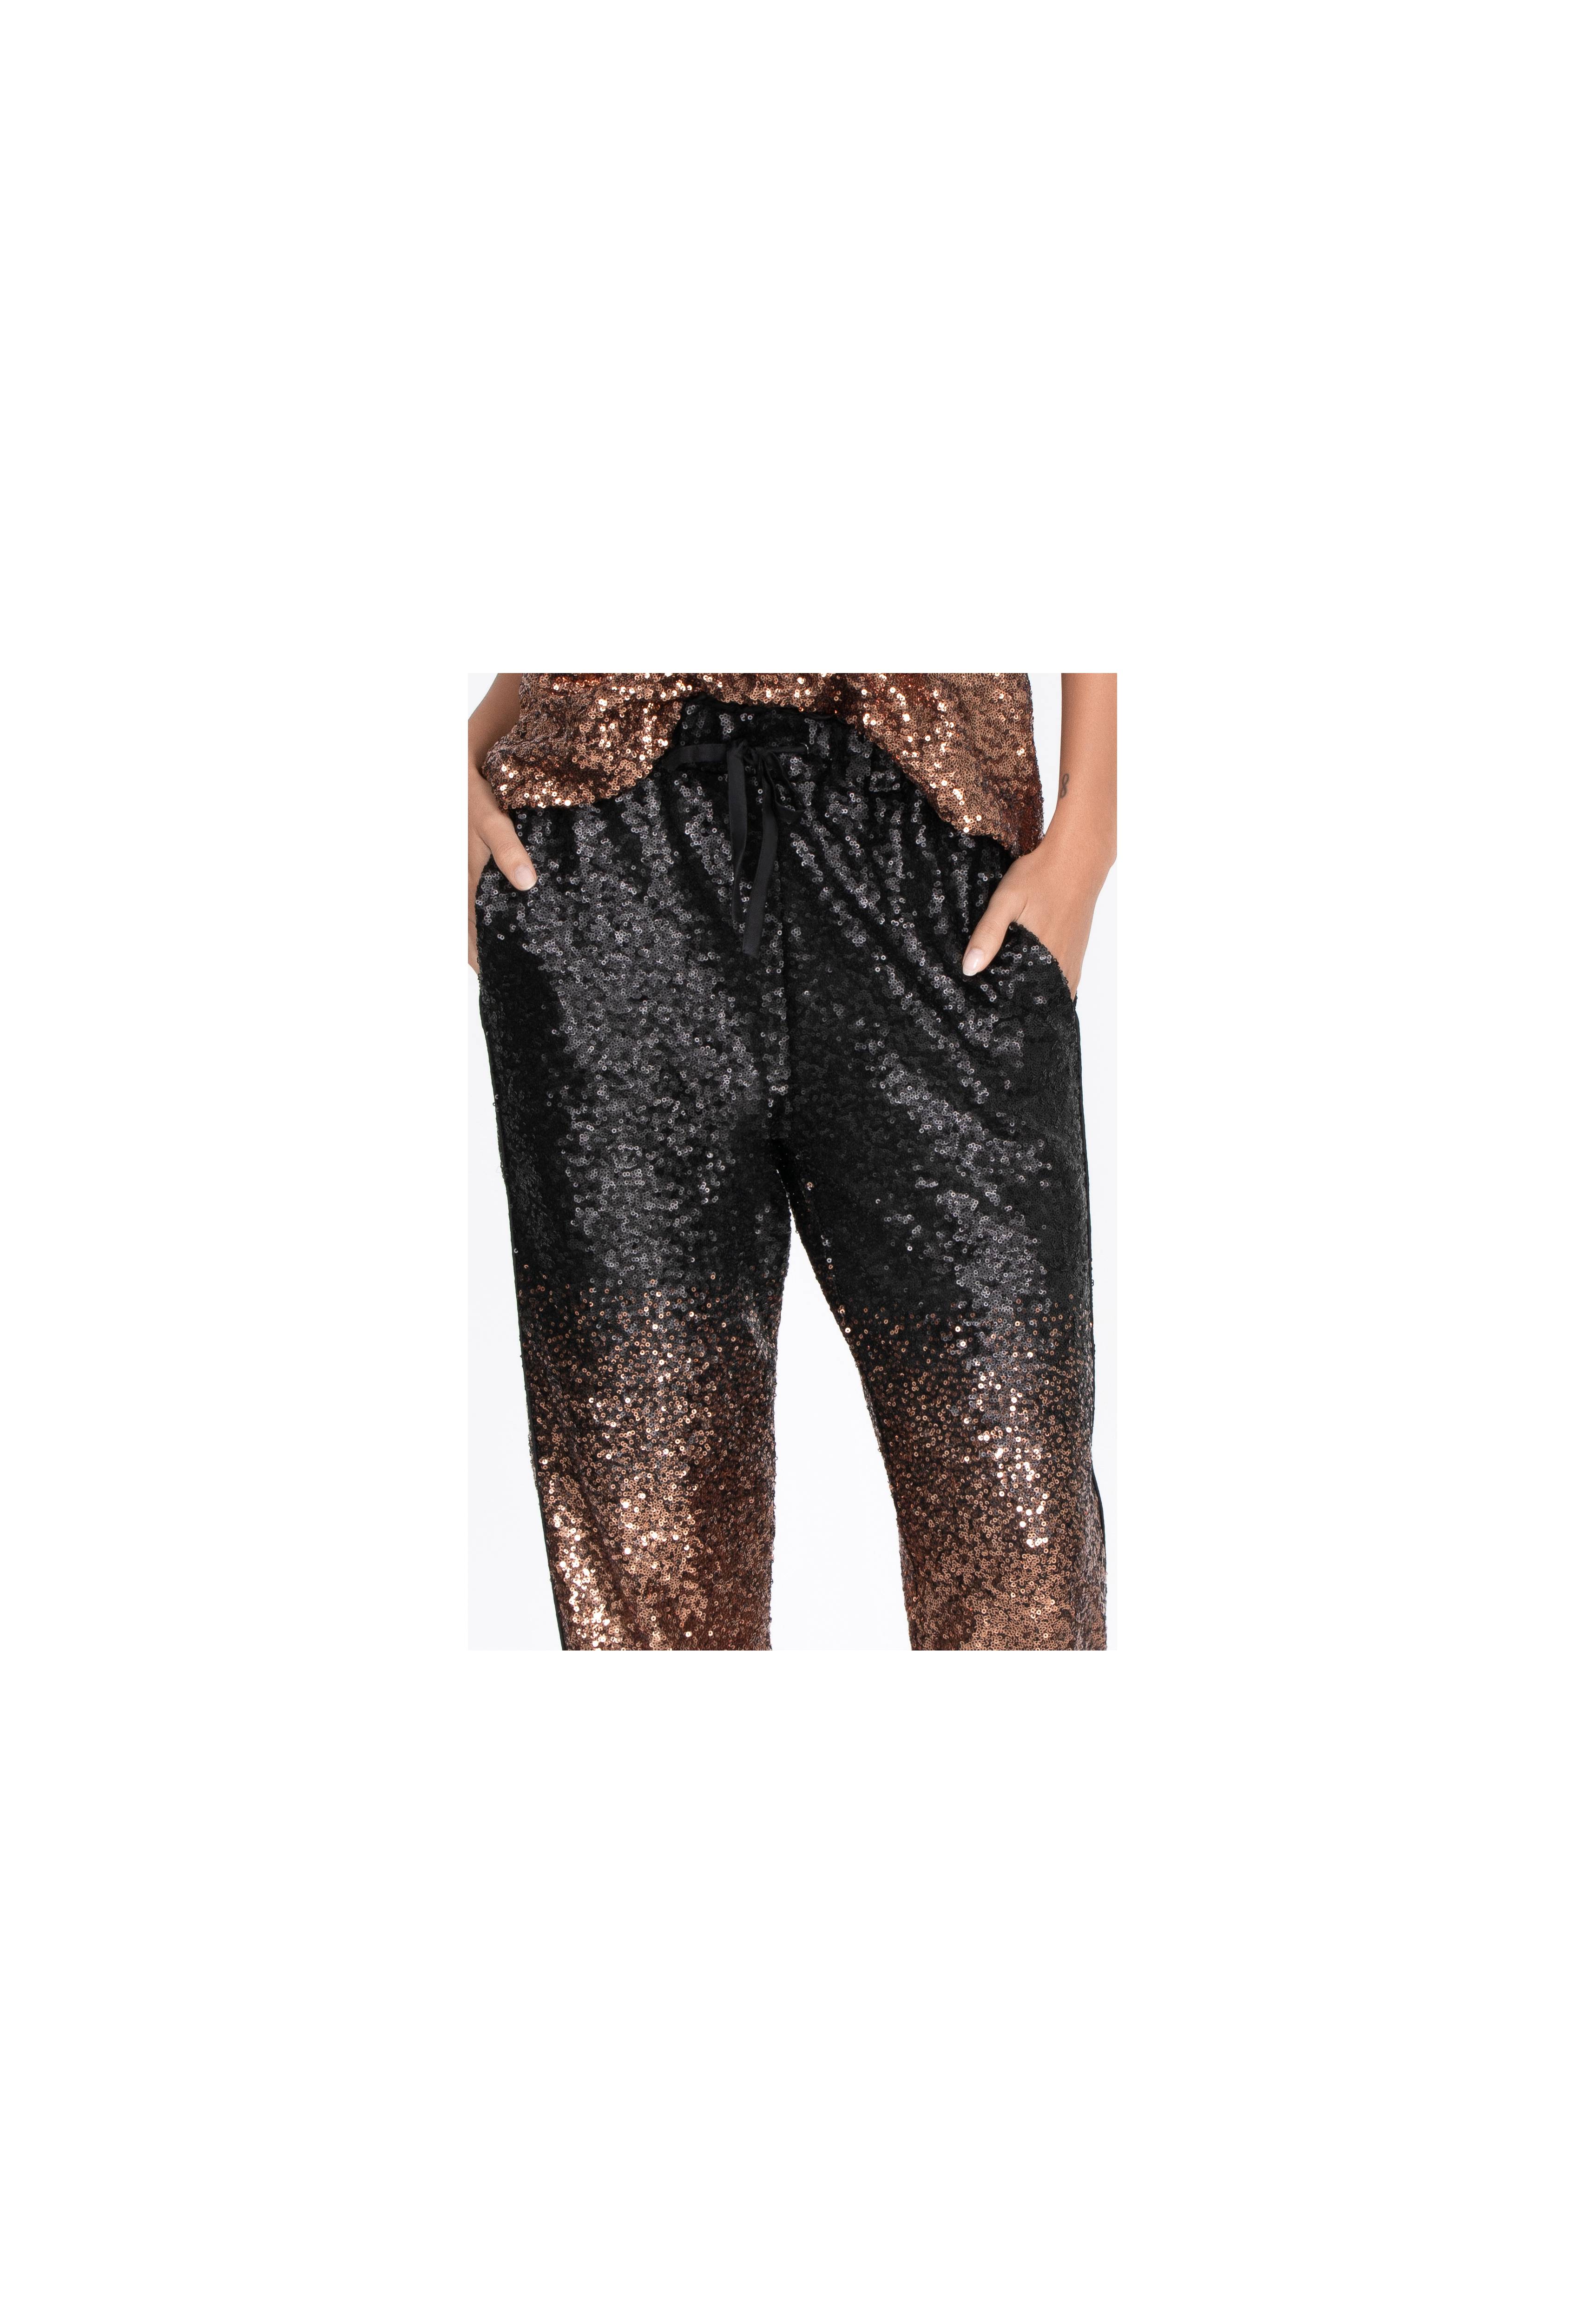 Sequin Gold Jett Jogger, , large image number 5